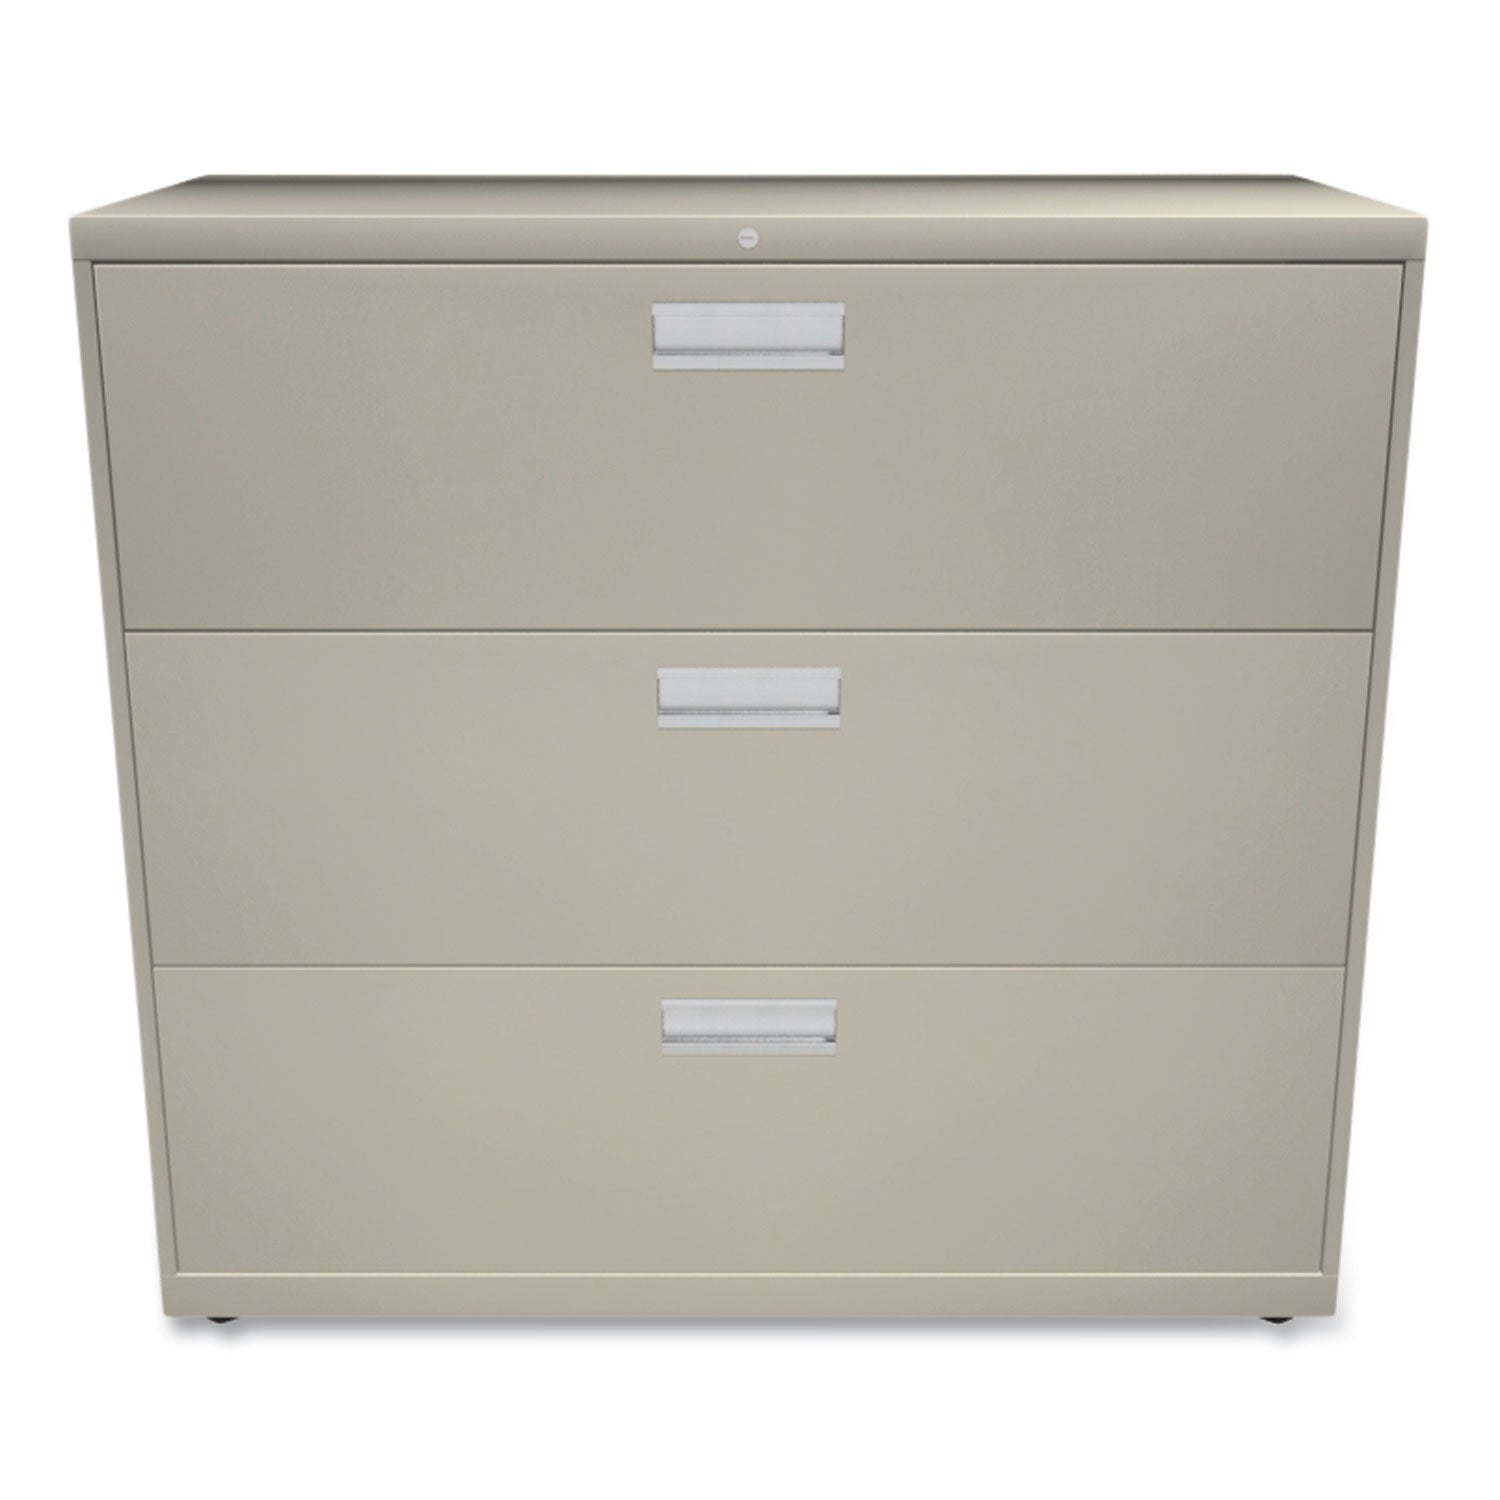 Brigade 600 Series Lateral File, 3 Legal/Letter-Size File Drawers, Putty, 42" x 18" x 39.13 - 